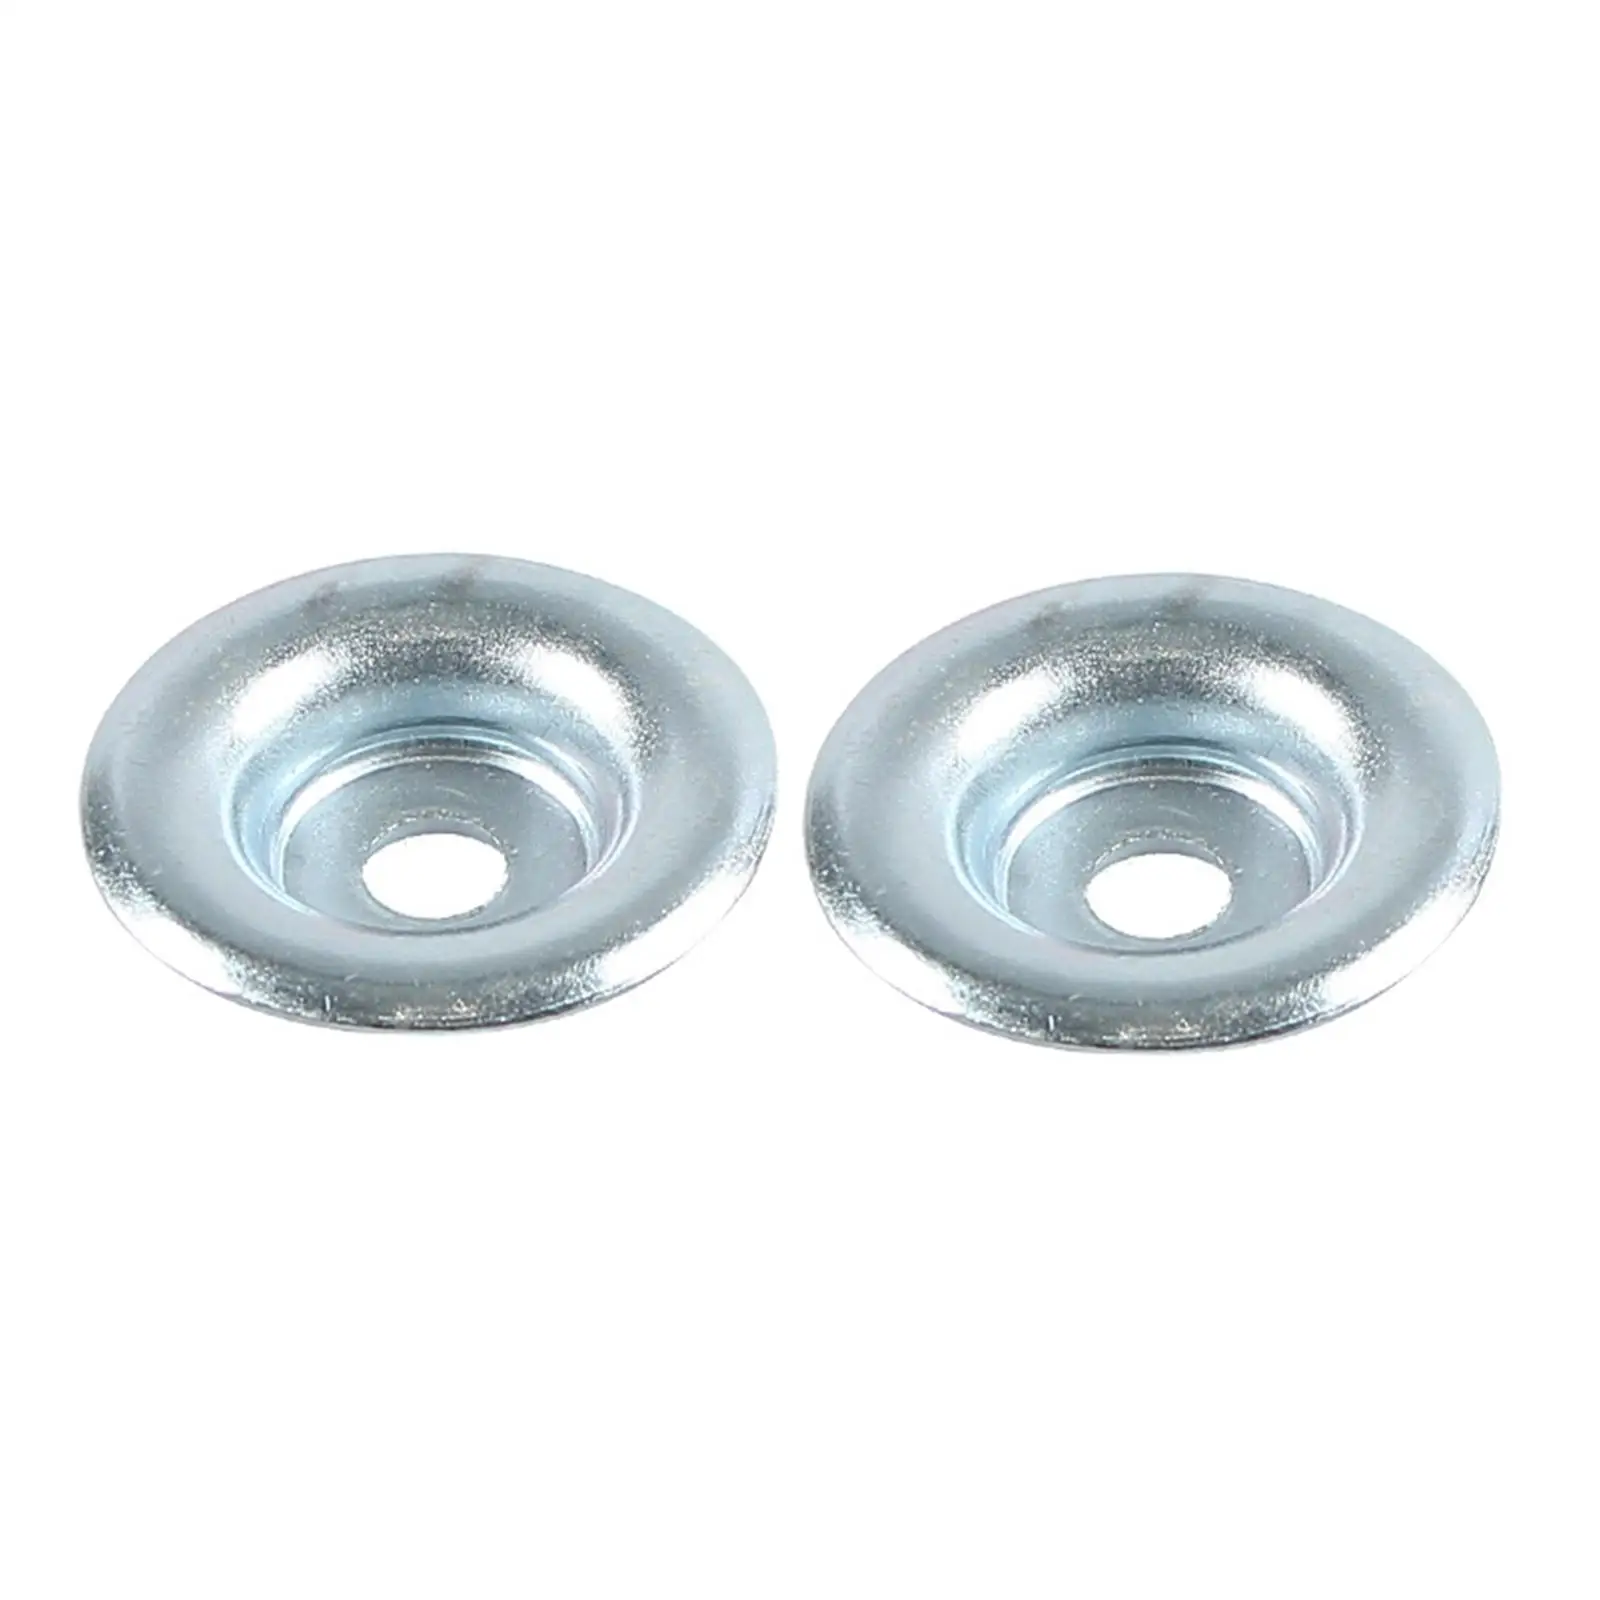 Bolts & Washers Set for  Fit for Polaris  RS1 RZR 500 1000 